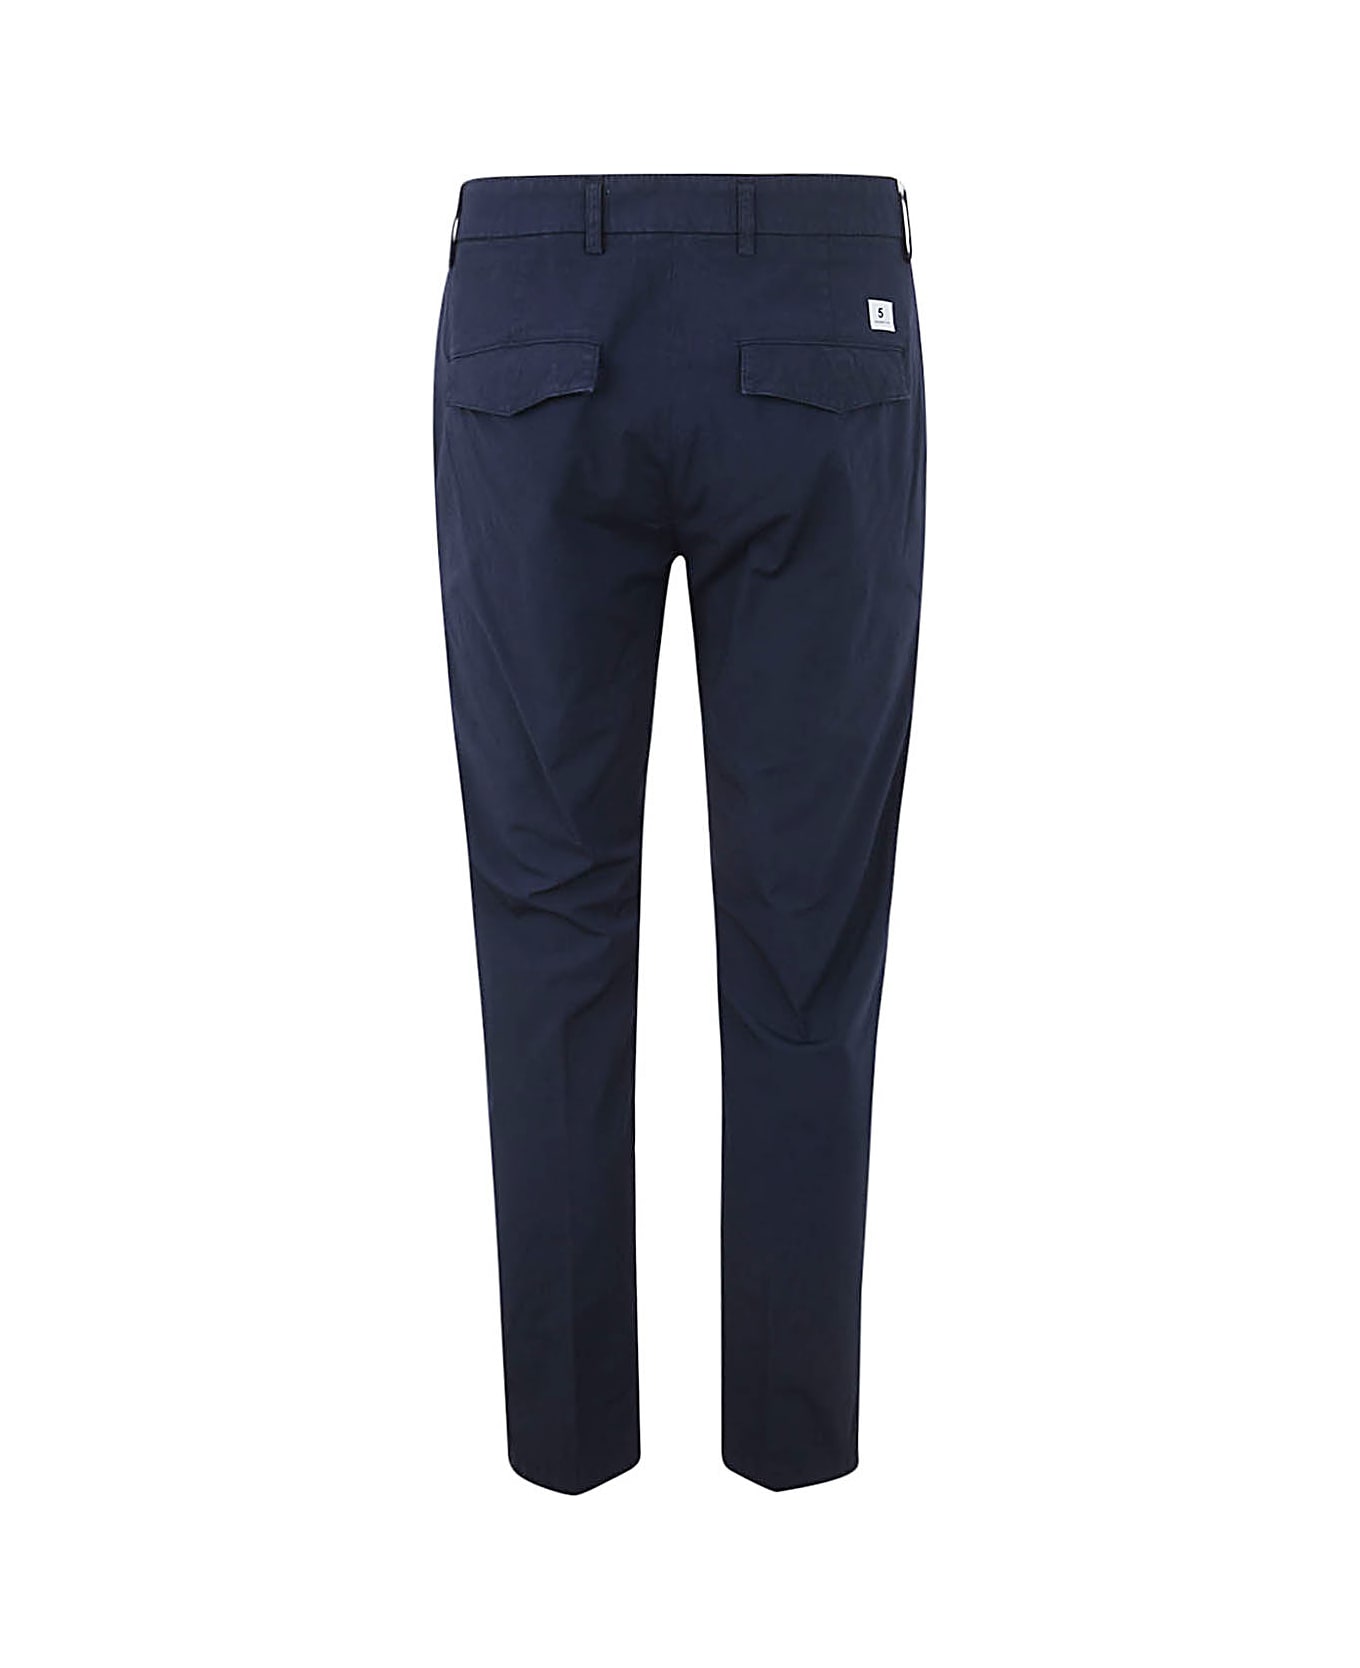 Department Five Prince Crop Chino Trousers - Navy ボトムス